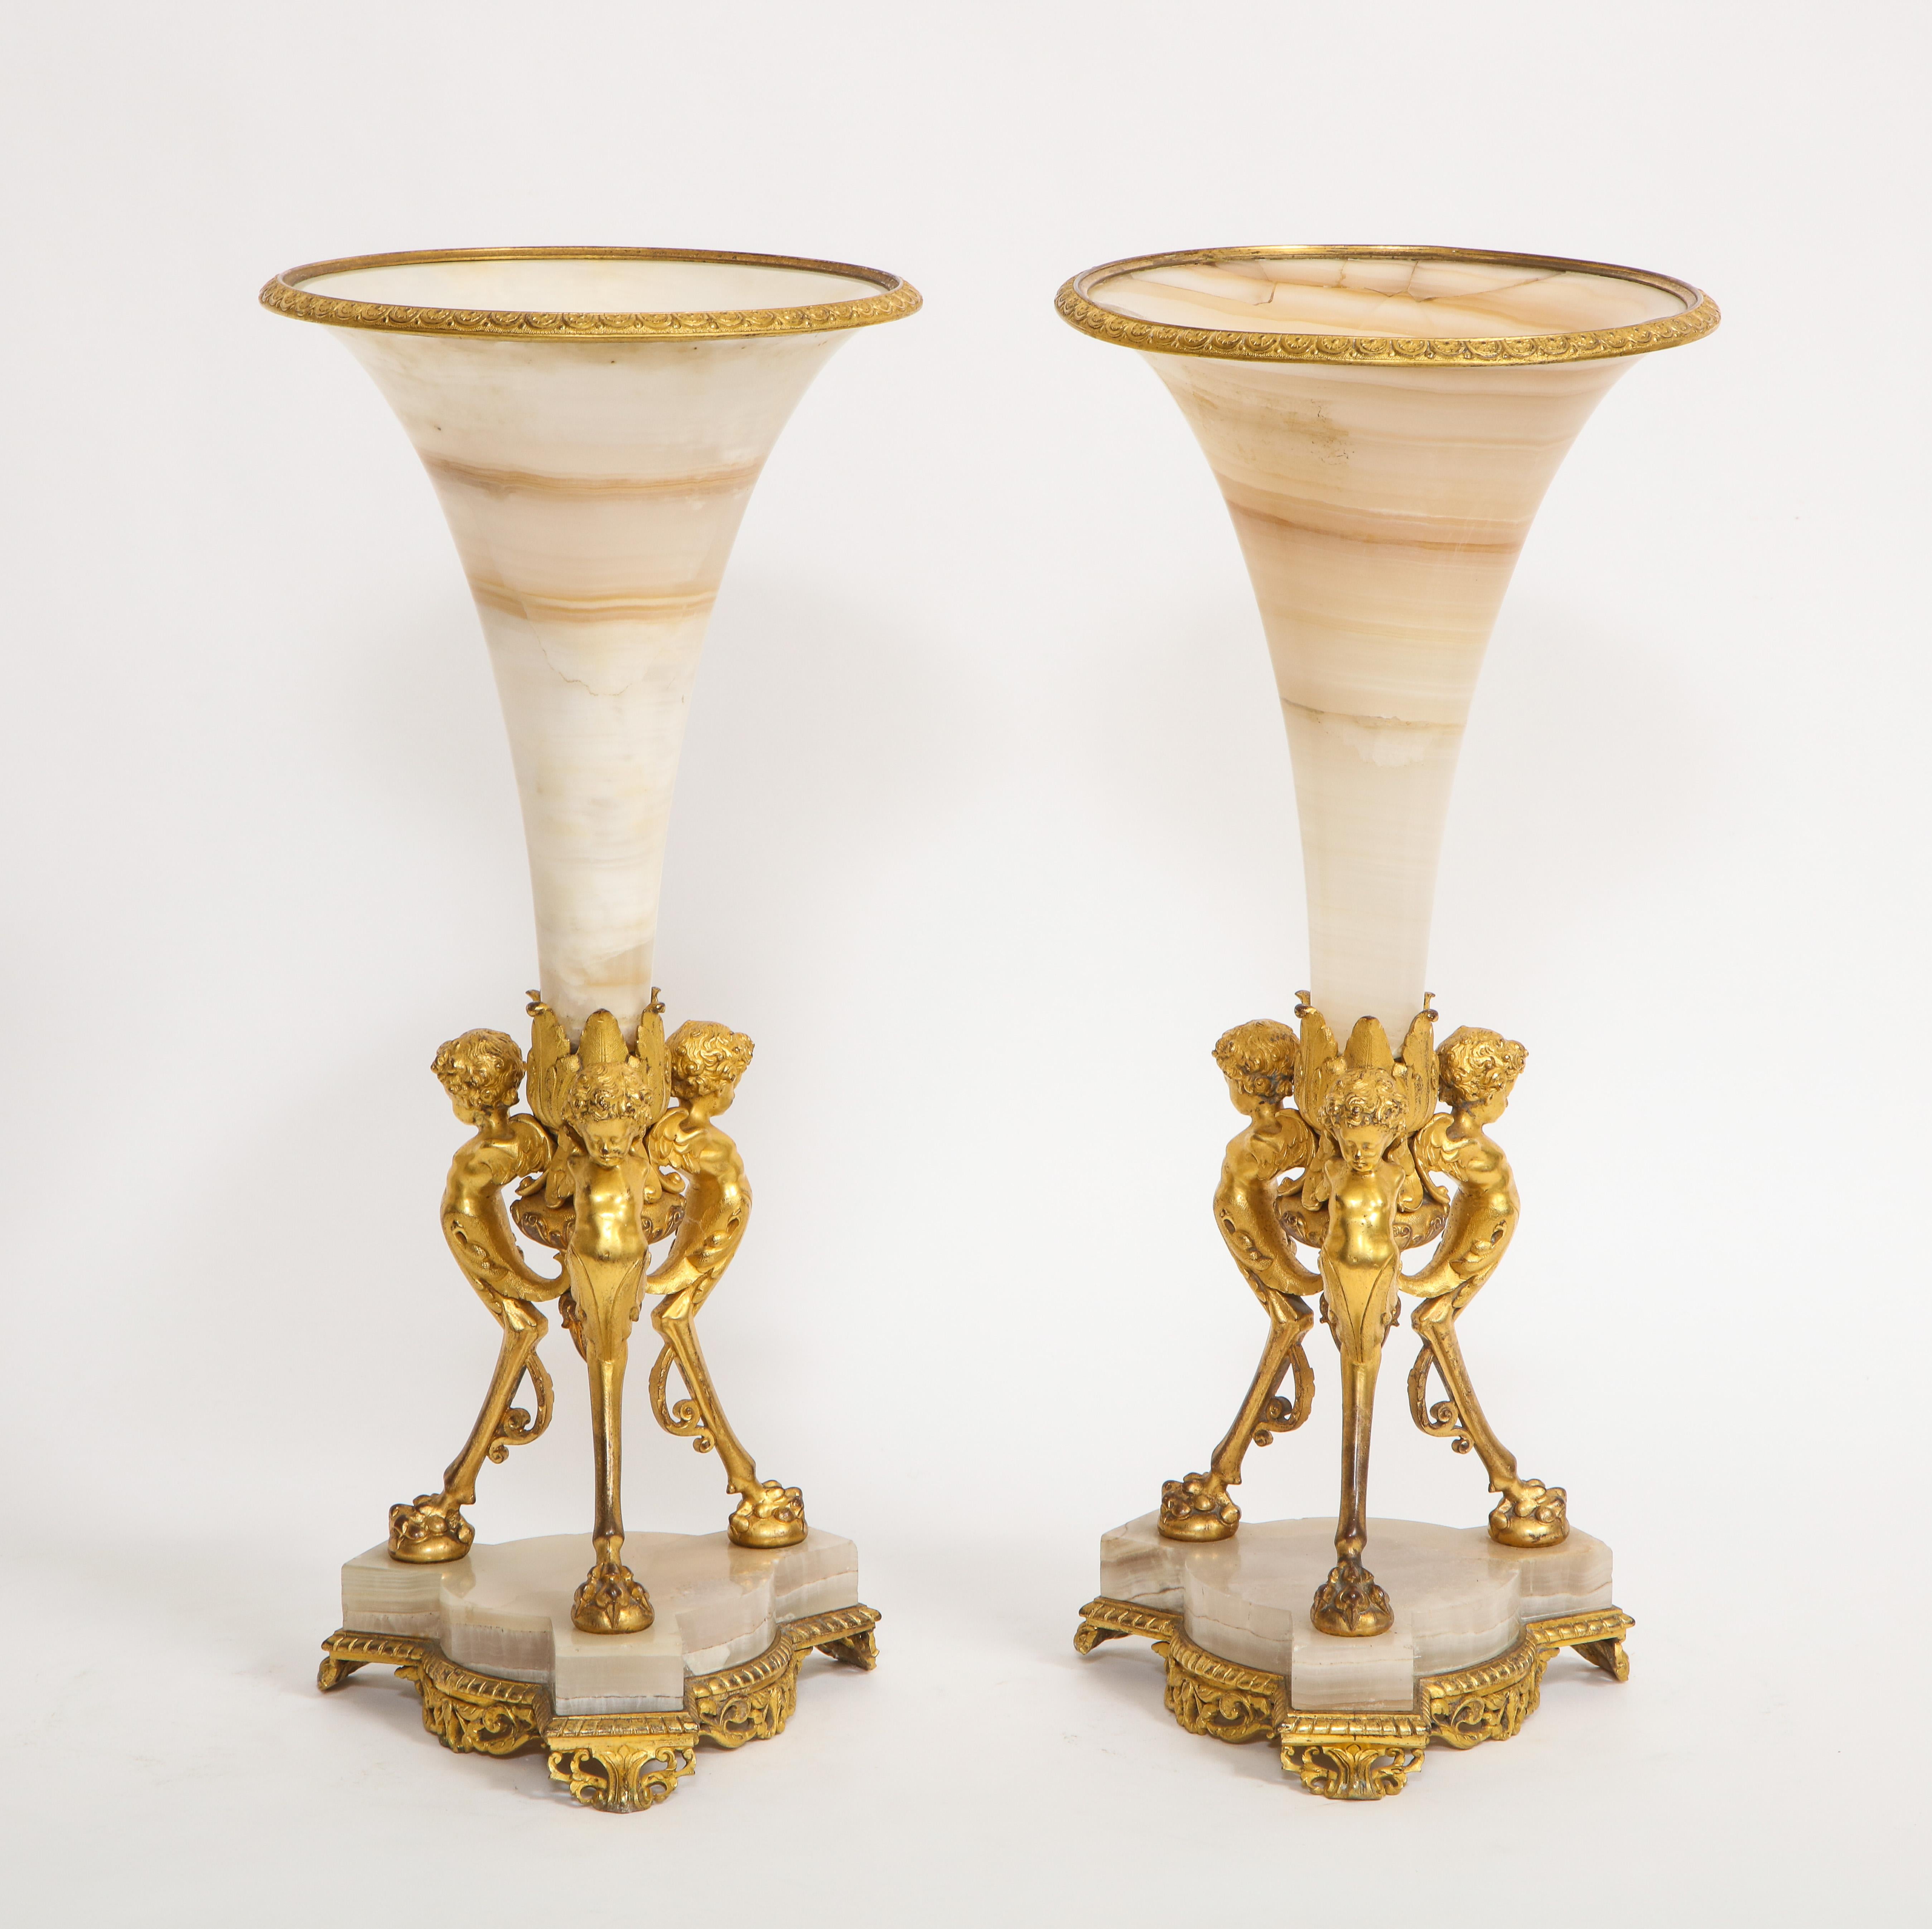 Louis XVI Pair of French 19th Century Figural Dore Bronze Mntd. Alabaster Trumpet Vases For Sale